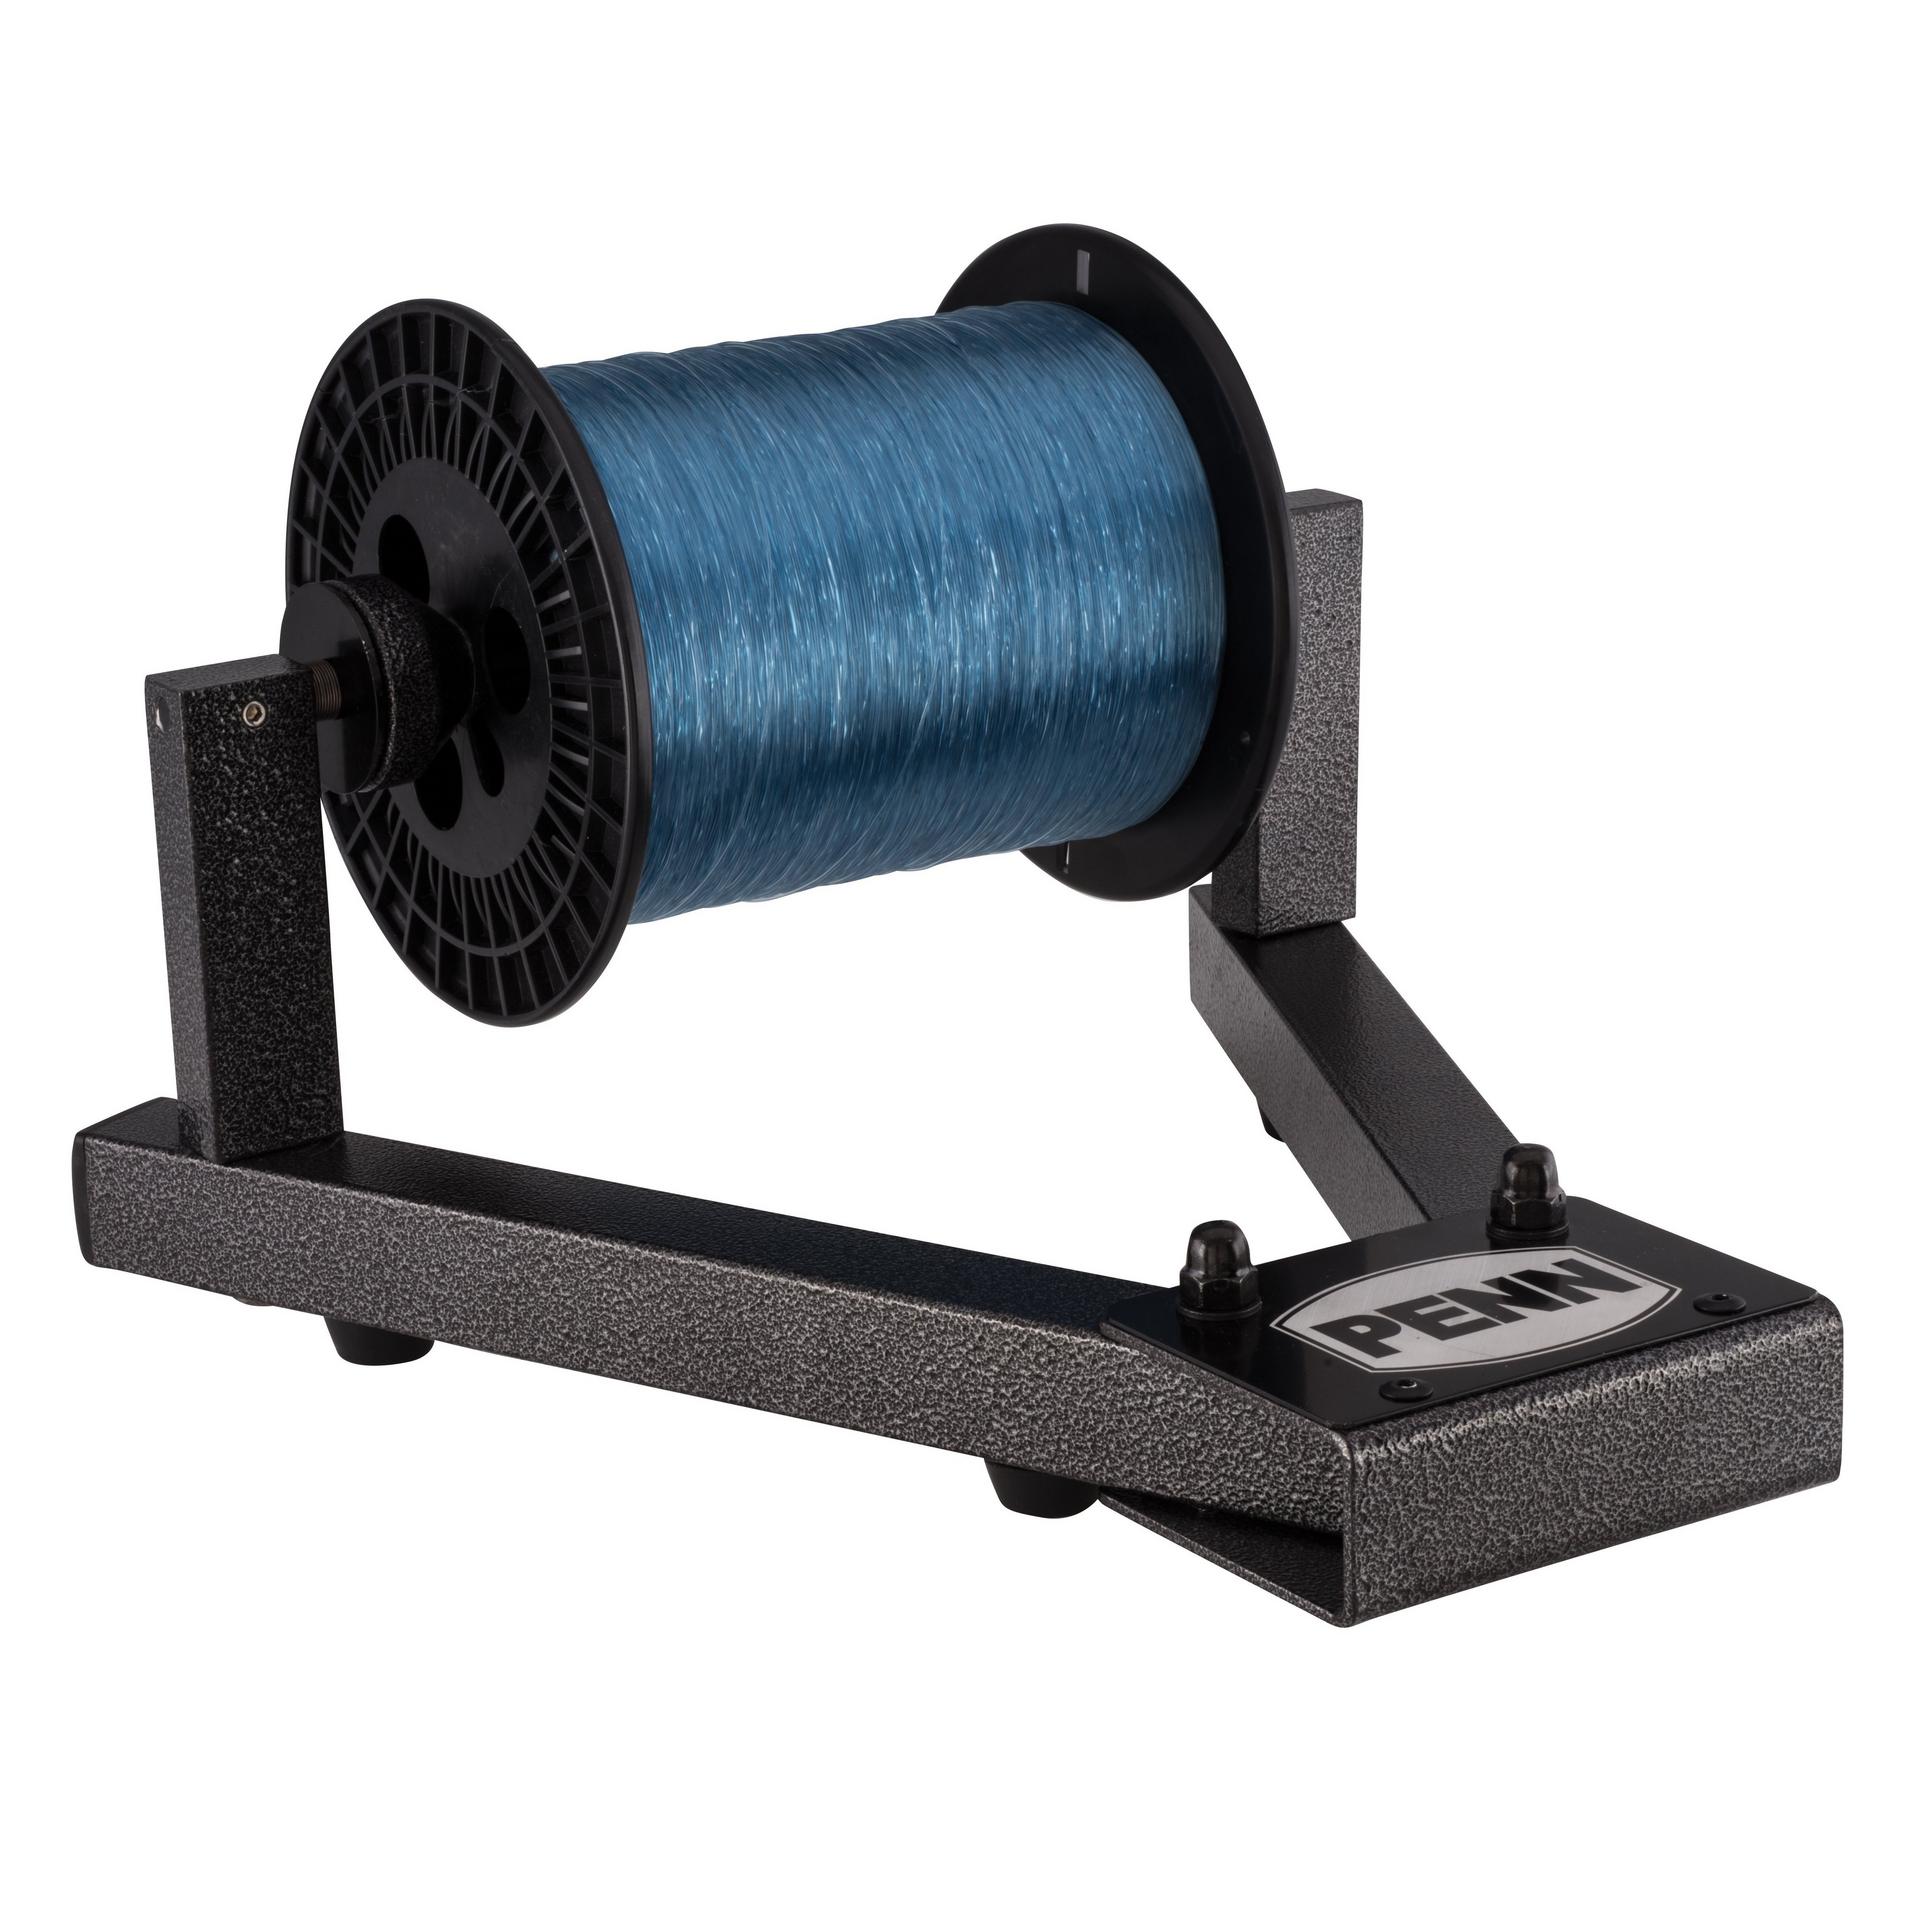 Hapyson YH-800 Electric fishing line winder Winding from both reel